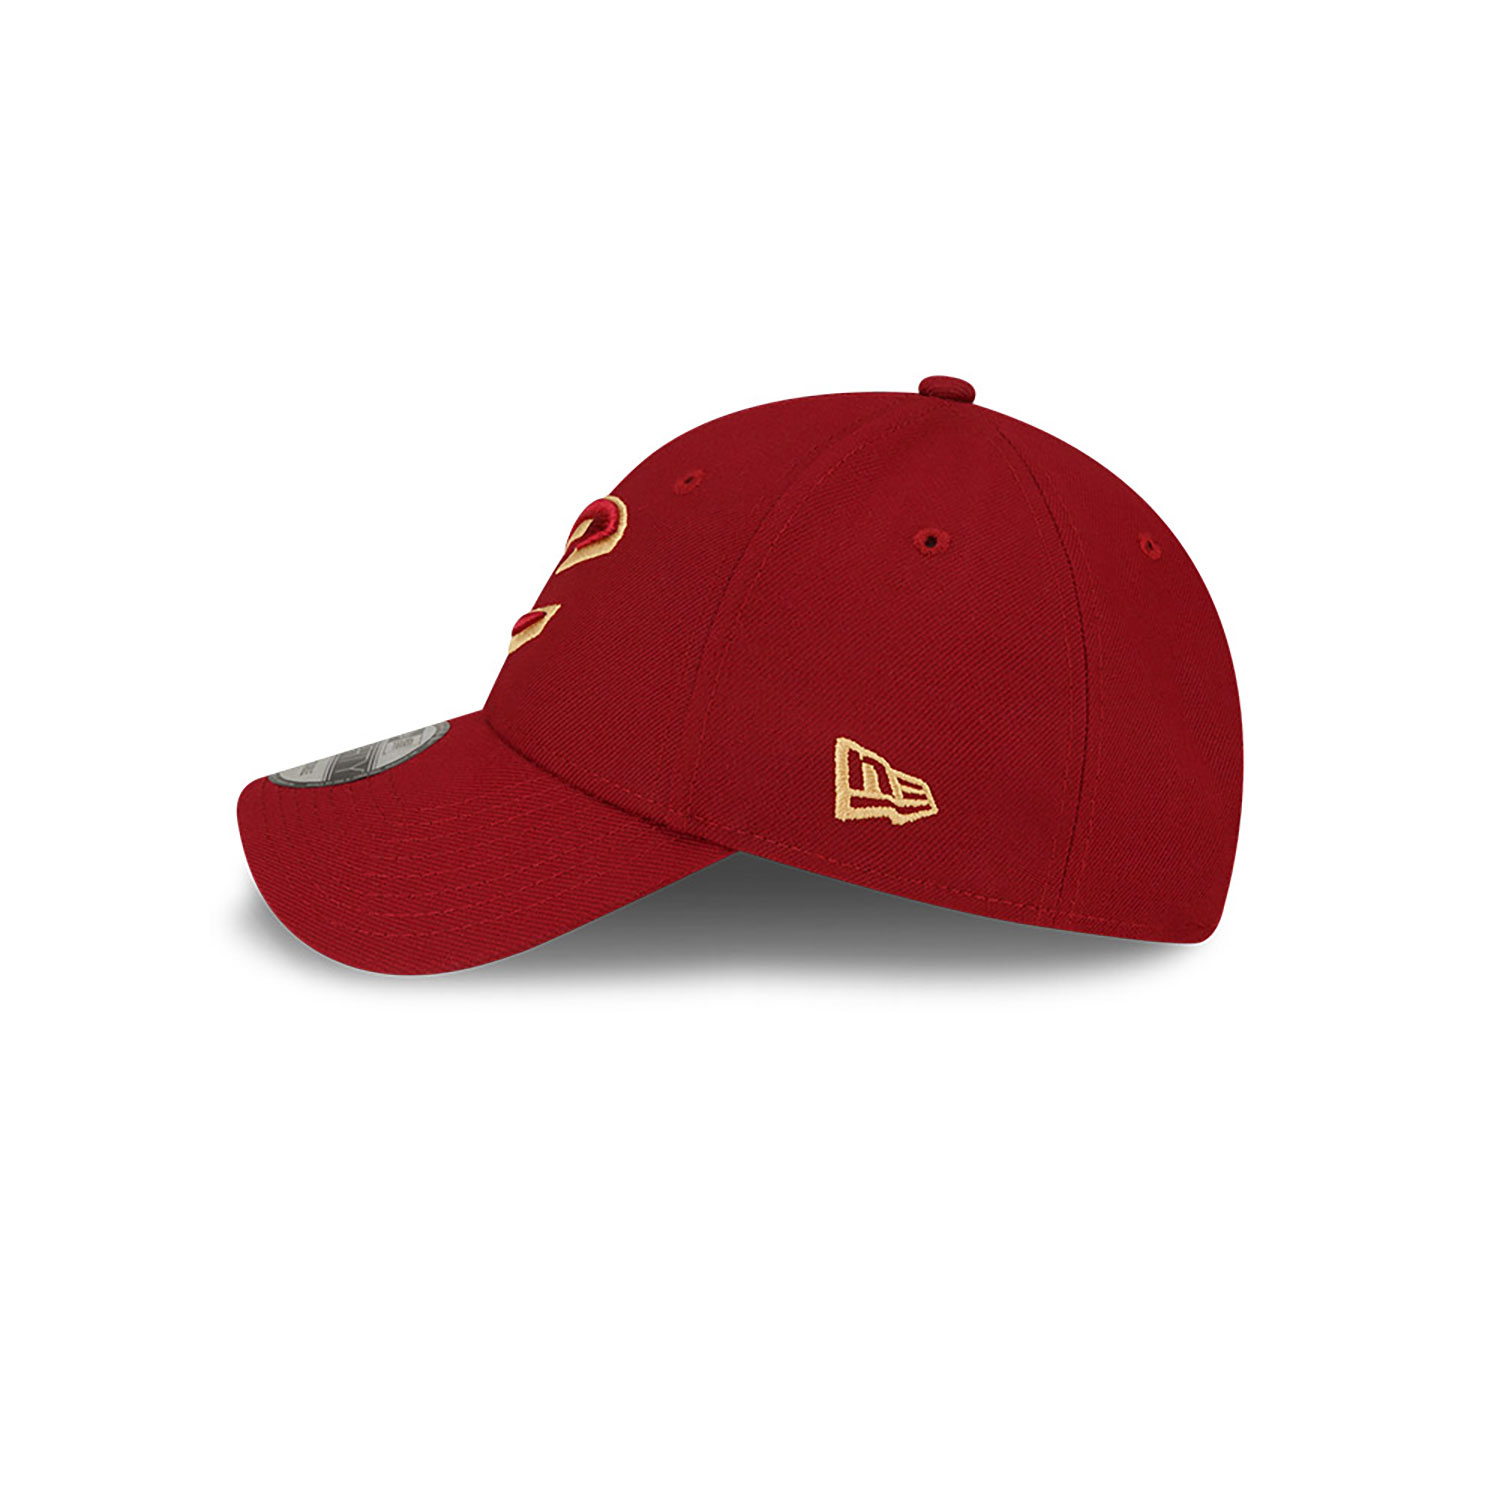 Cleveland Cavaliers The League Dark Red 9FORTY Adjustable Cap